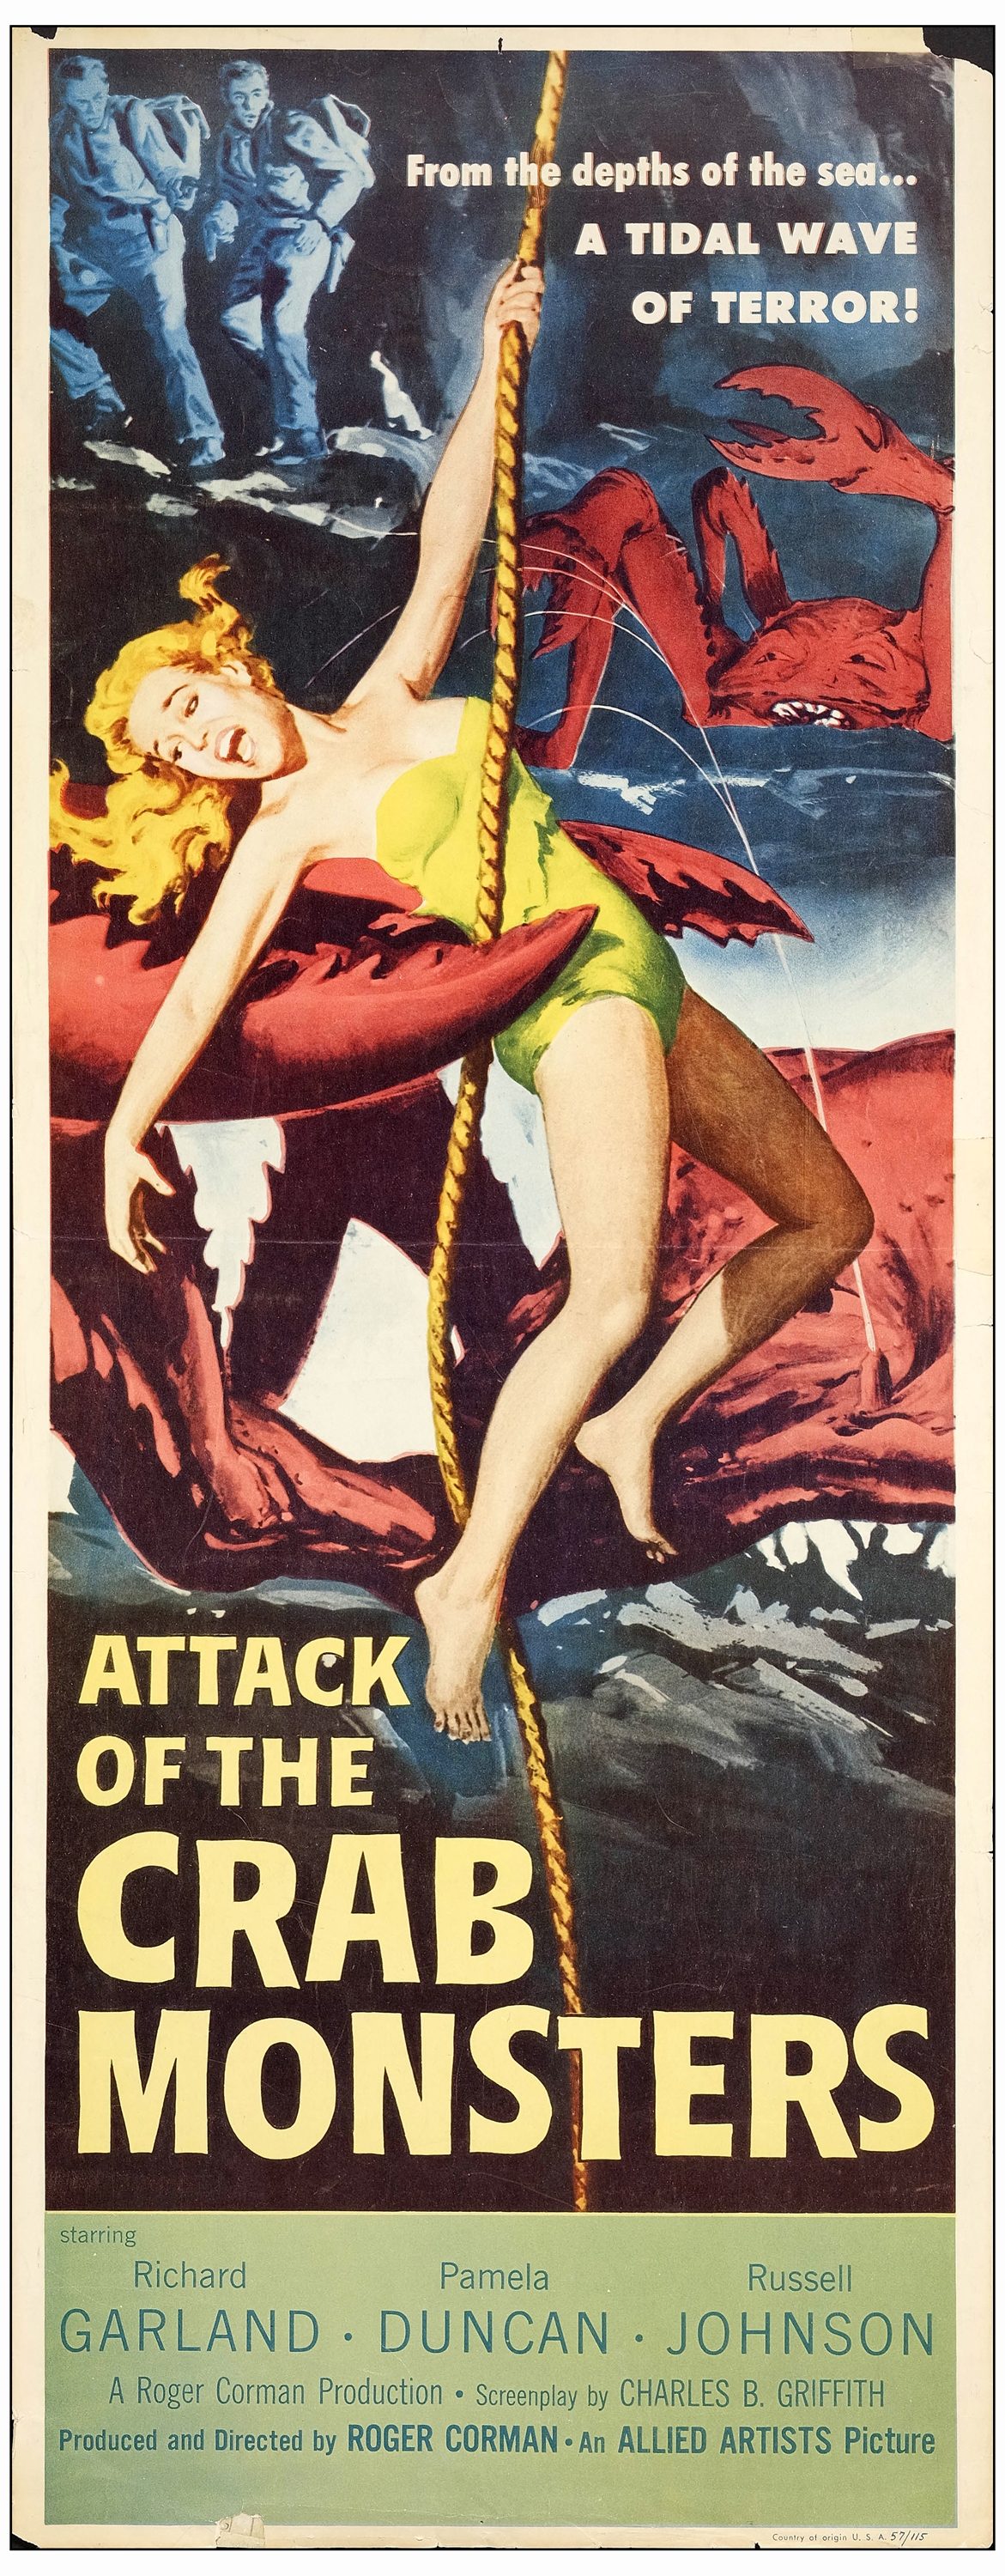 ATTACK OF THE CRAB MONSTERS - Insert (14" x 36"); Fine- Folded